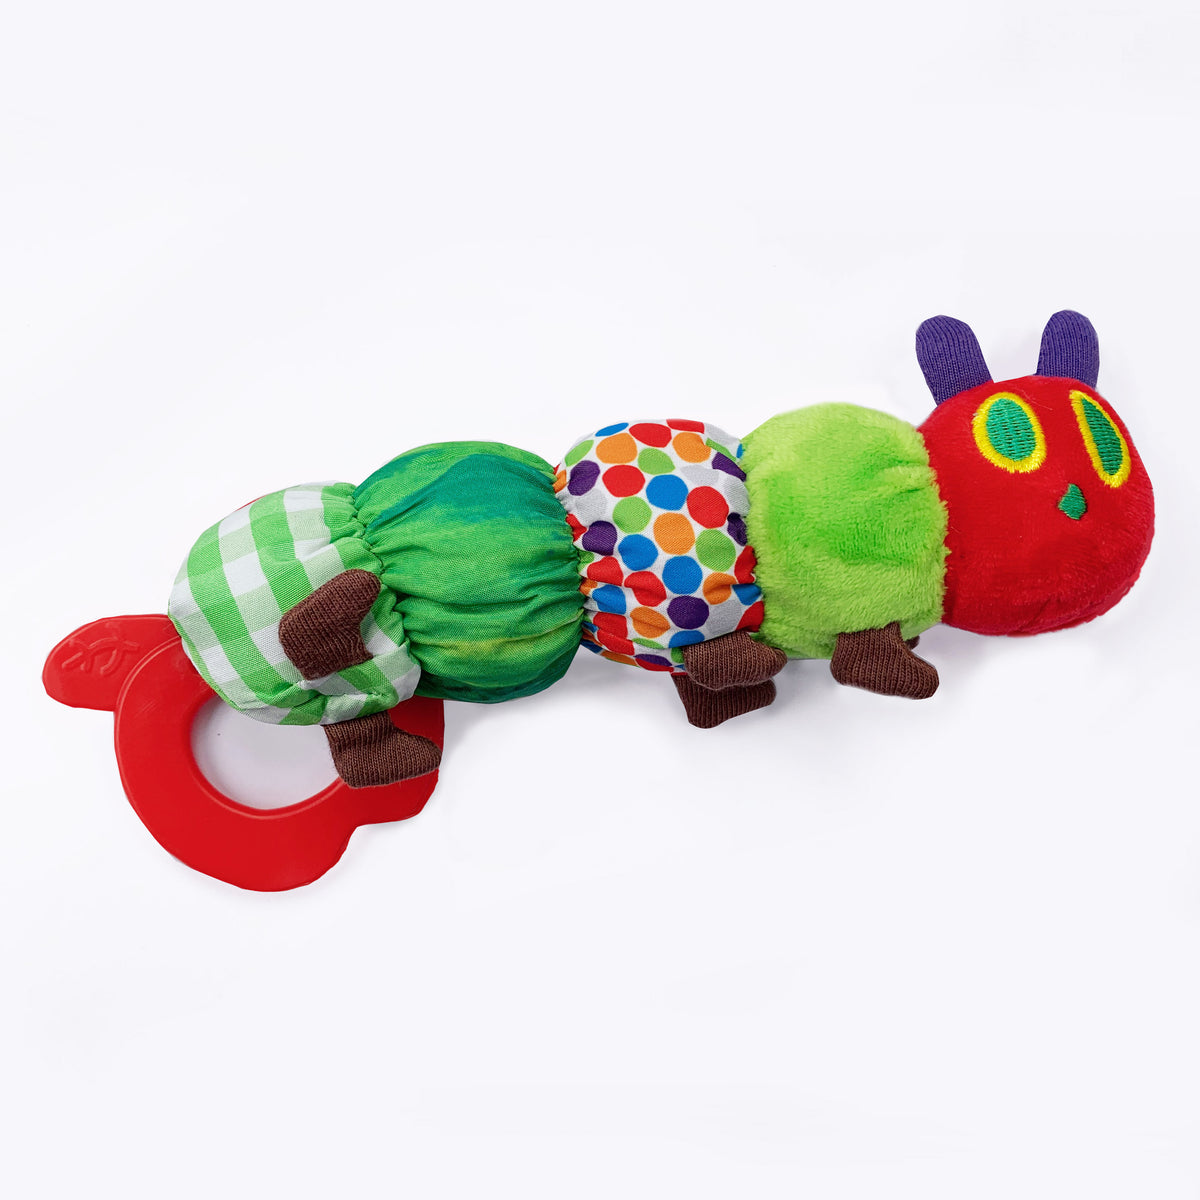 The Very Hungry Caterpillar Baby Gift Set